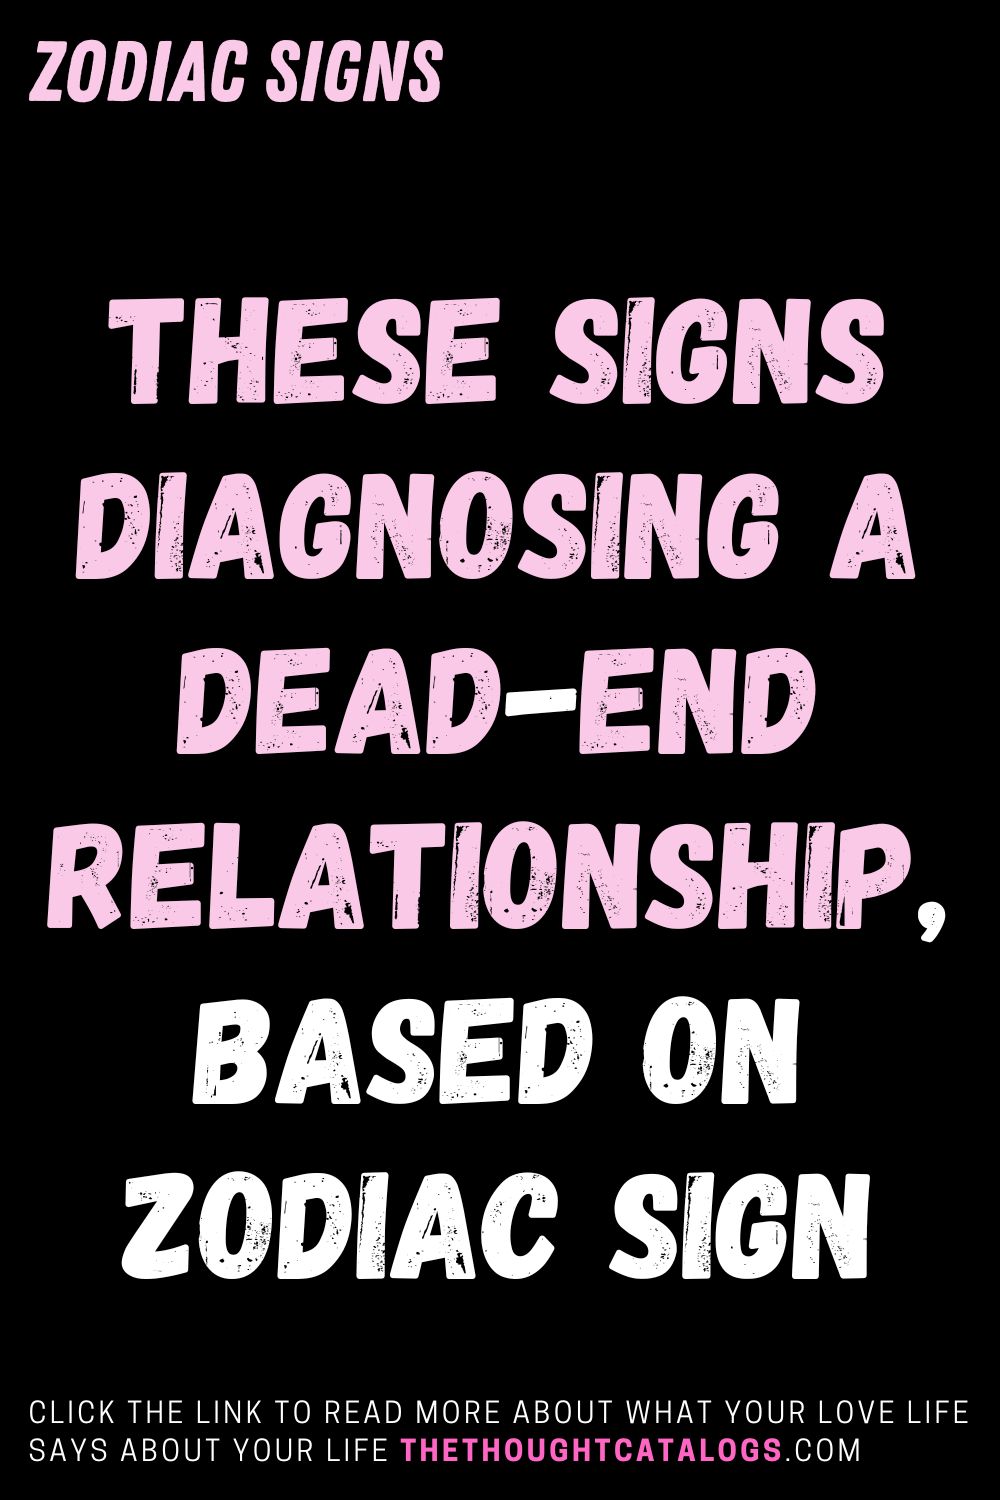 These signs Diagnosing A Dead-end Relationship, Based On Zodiac Sign